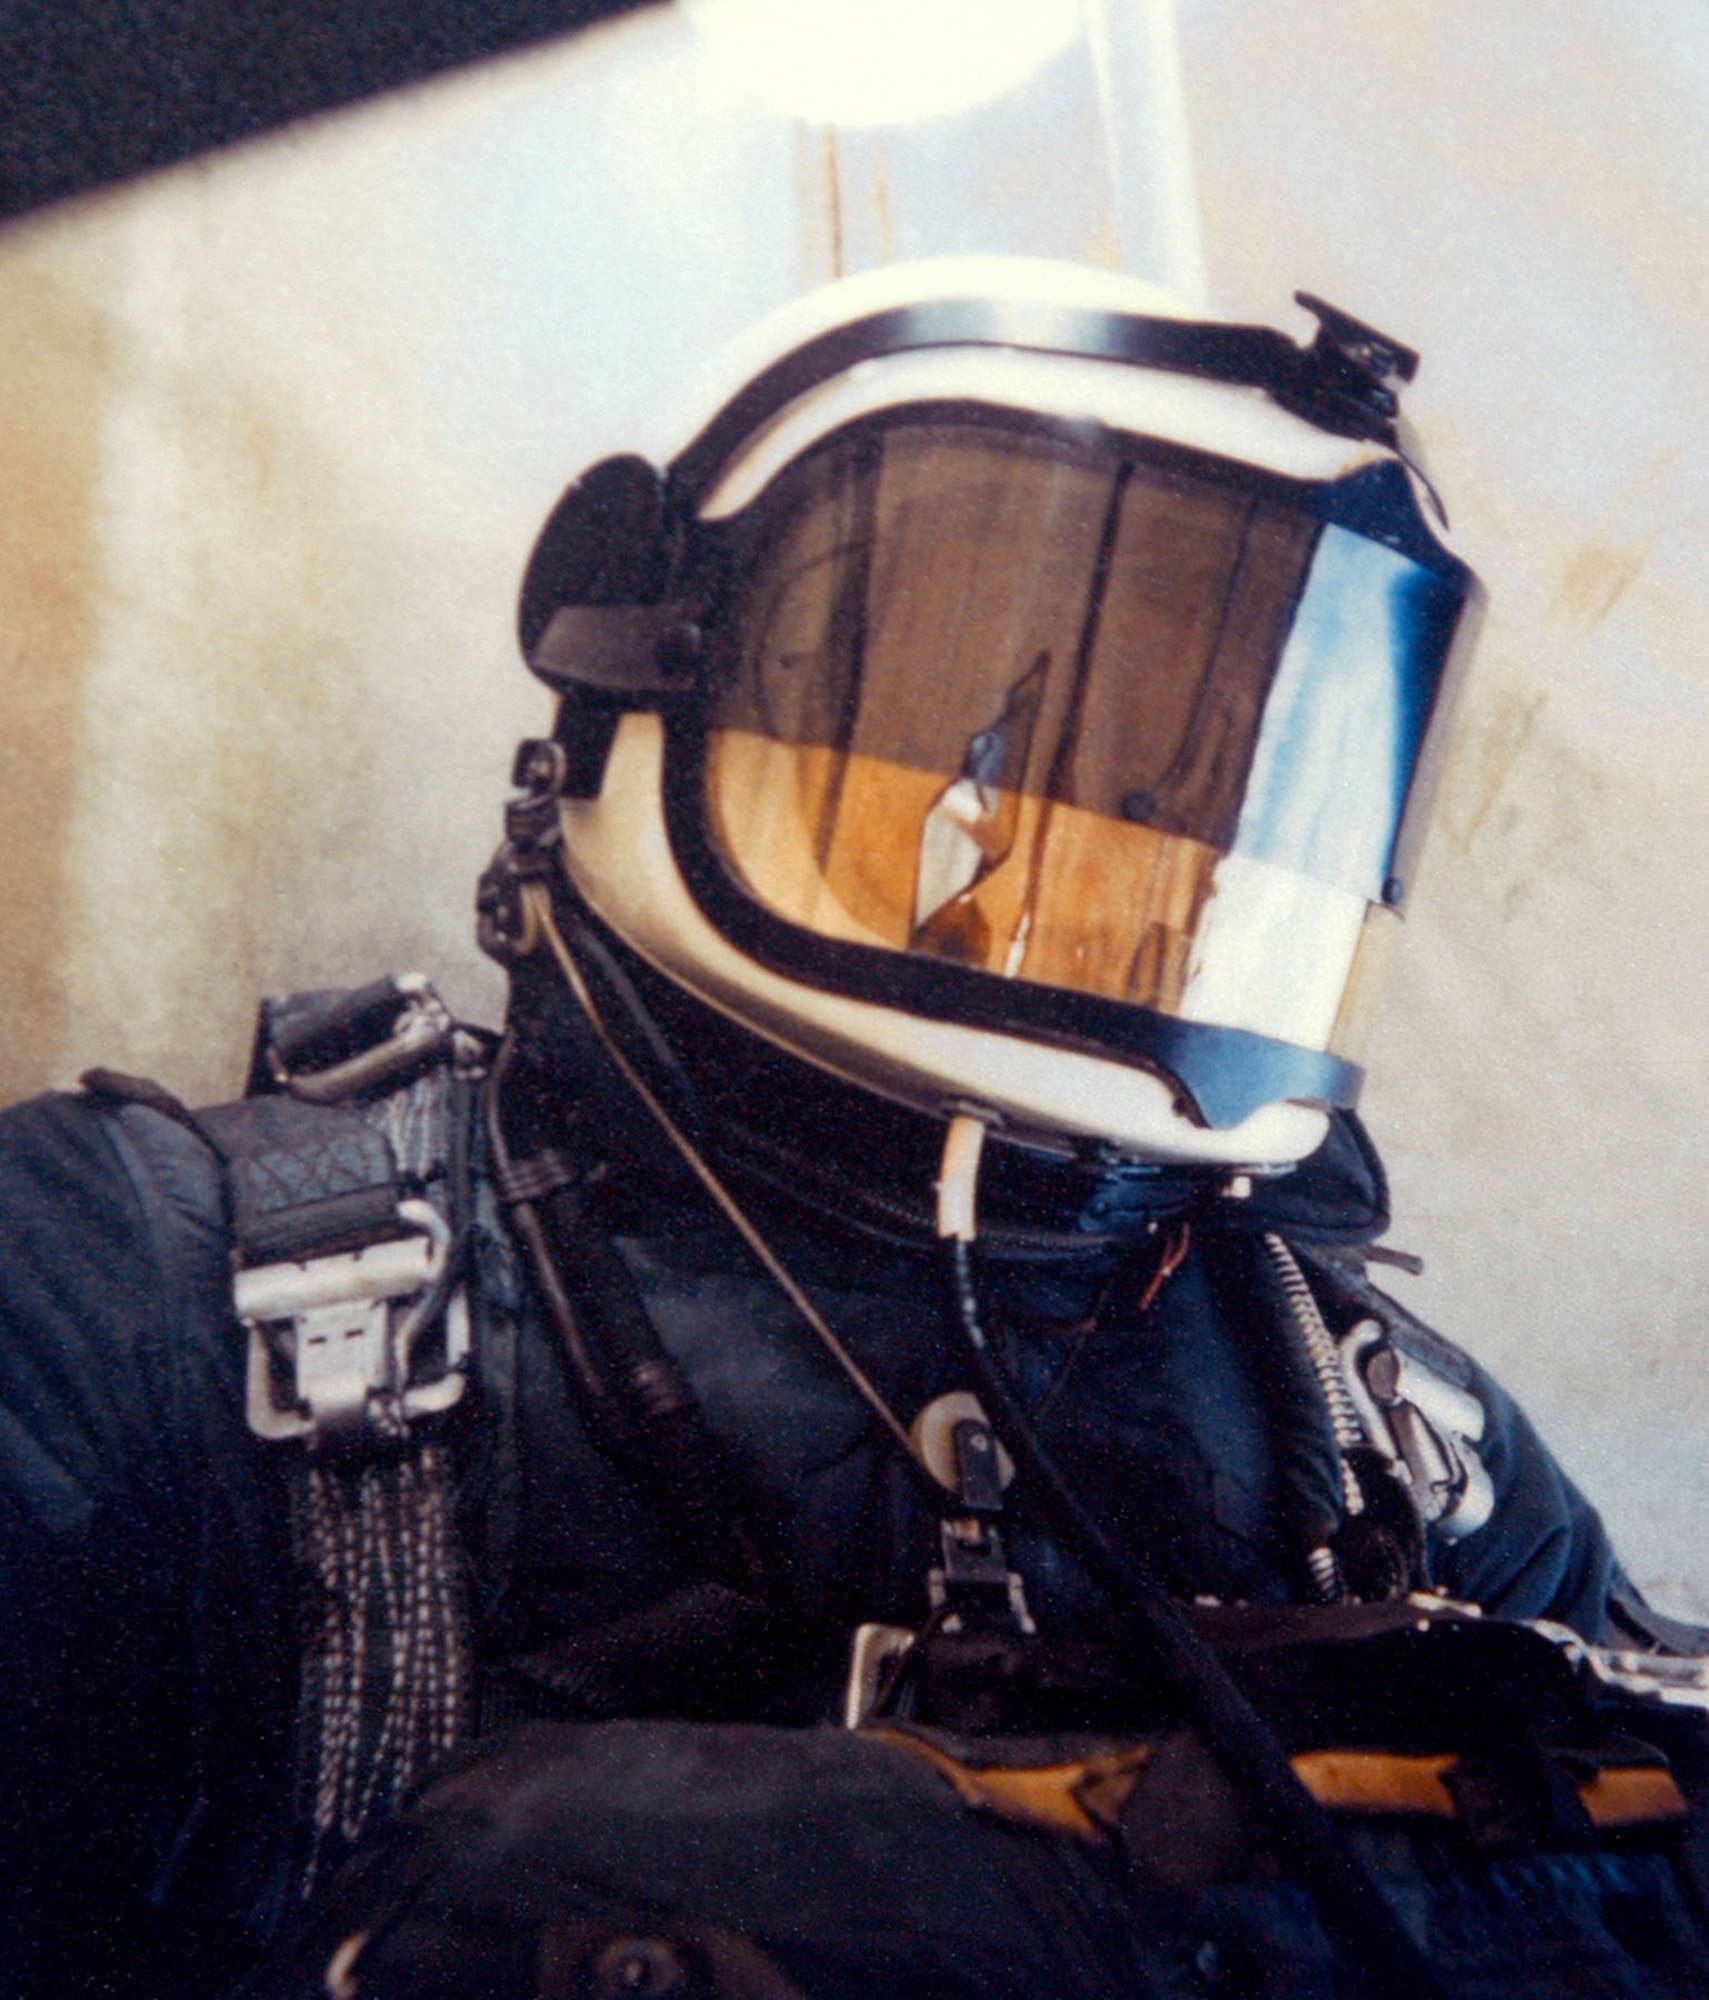 Capt. Kittinger during the Excelsior III ascent. Strapped to him were oxygen bottles, instrumentation and the Beaupre Multi-Stage Parachute system. (U.S. Air Force photo)